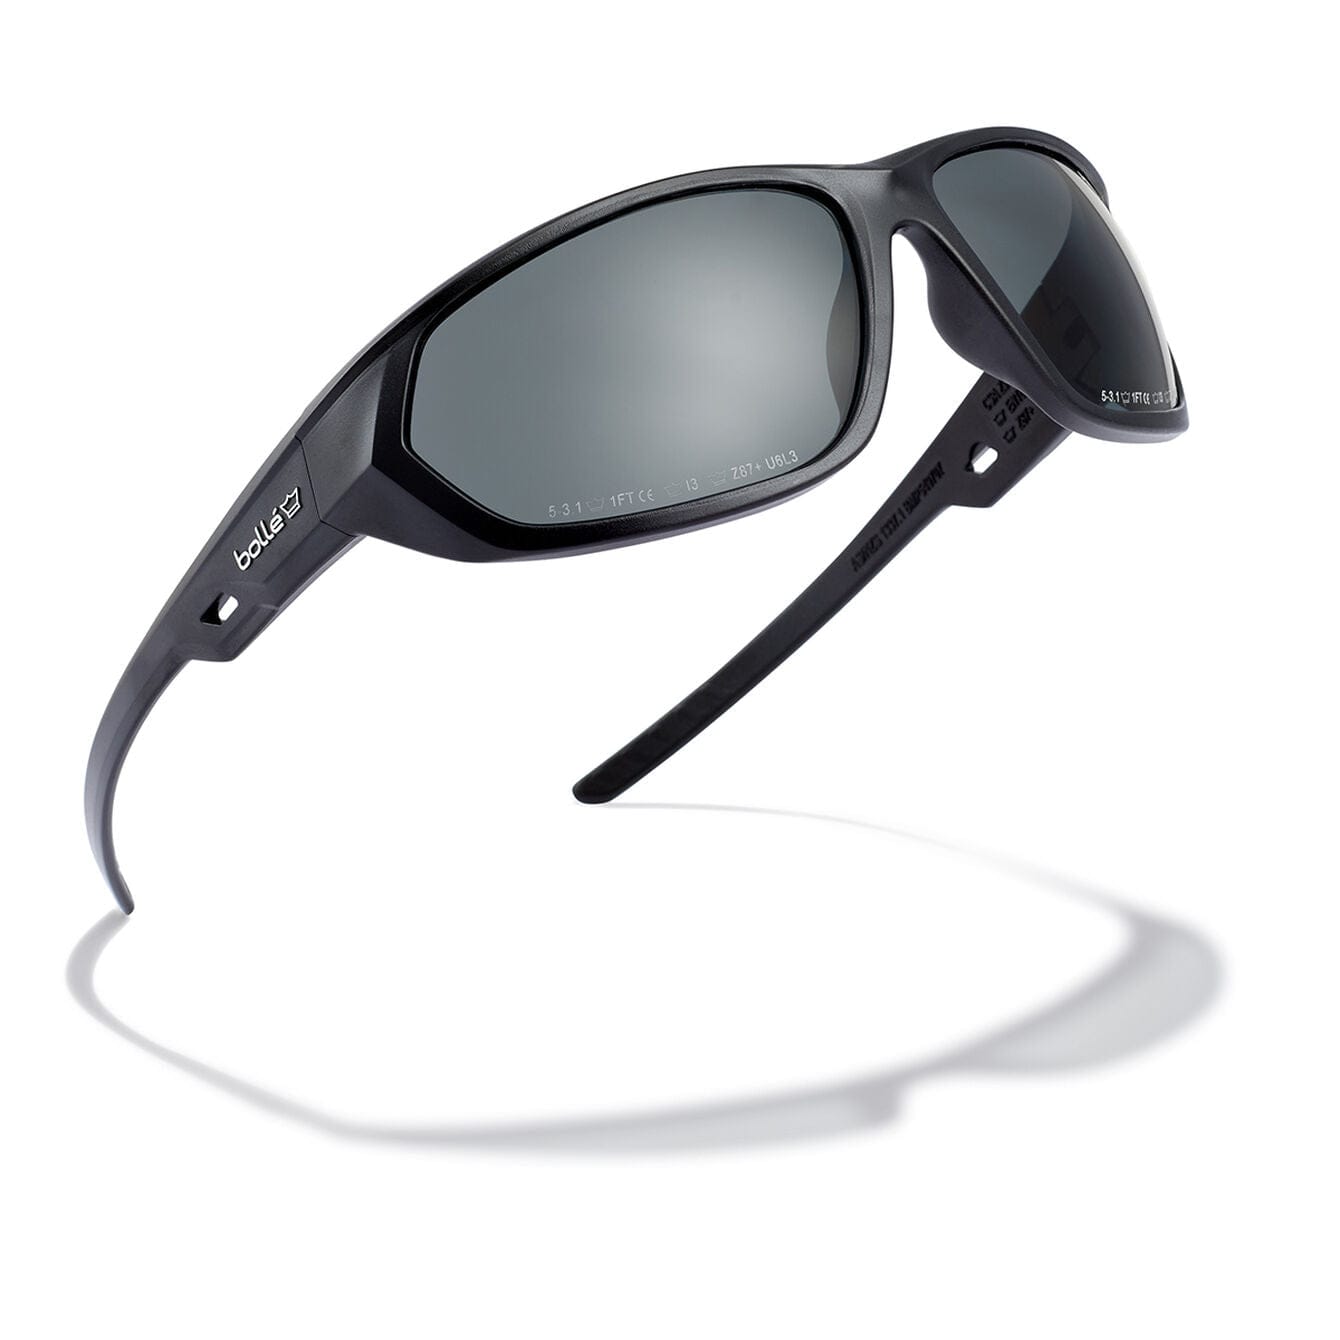 Bolle Komet Safety Glasses with Smoke Anti-Fog Lens